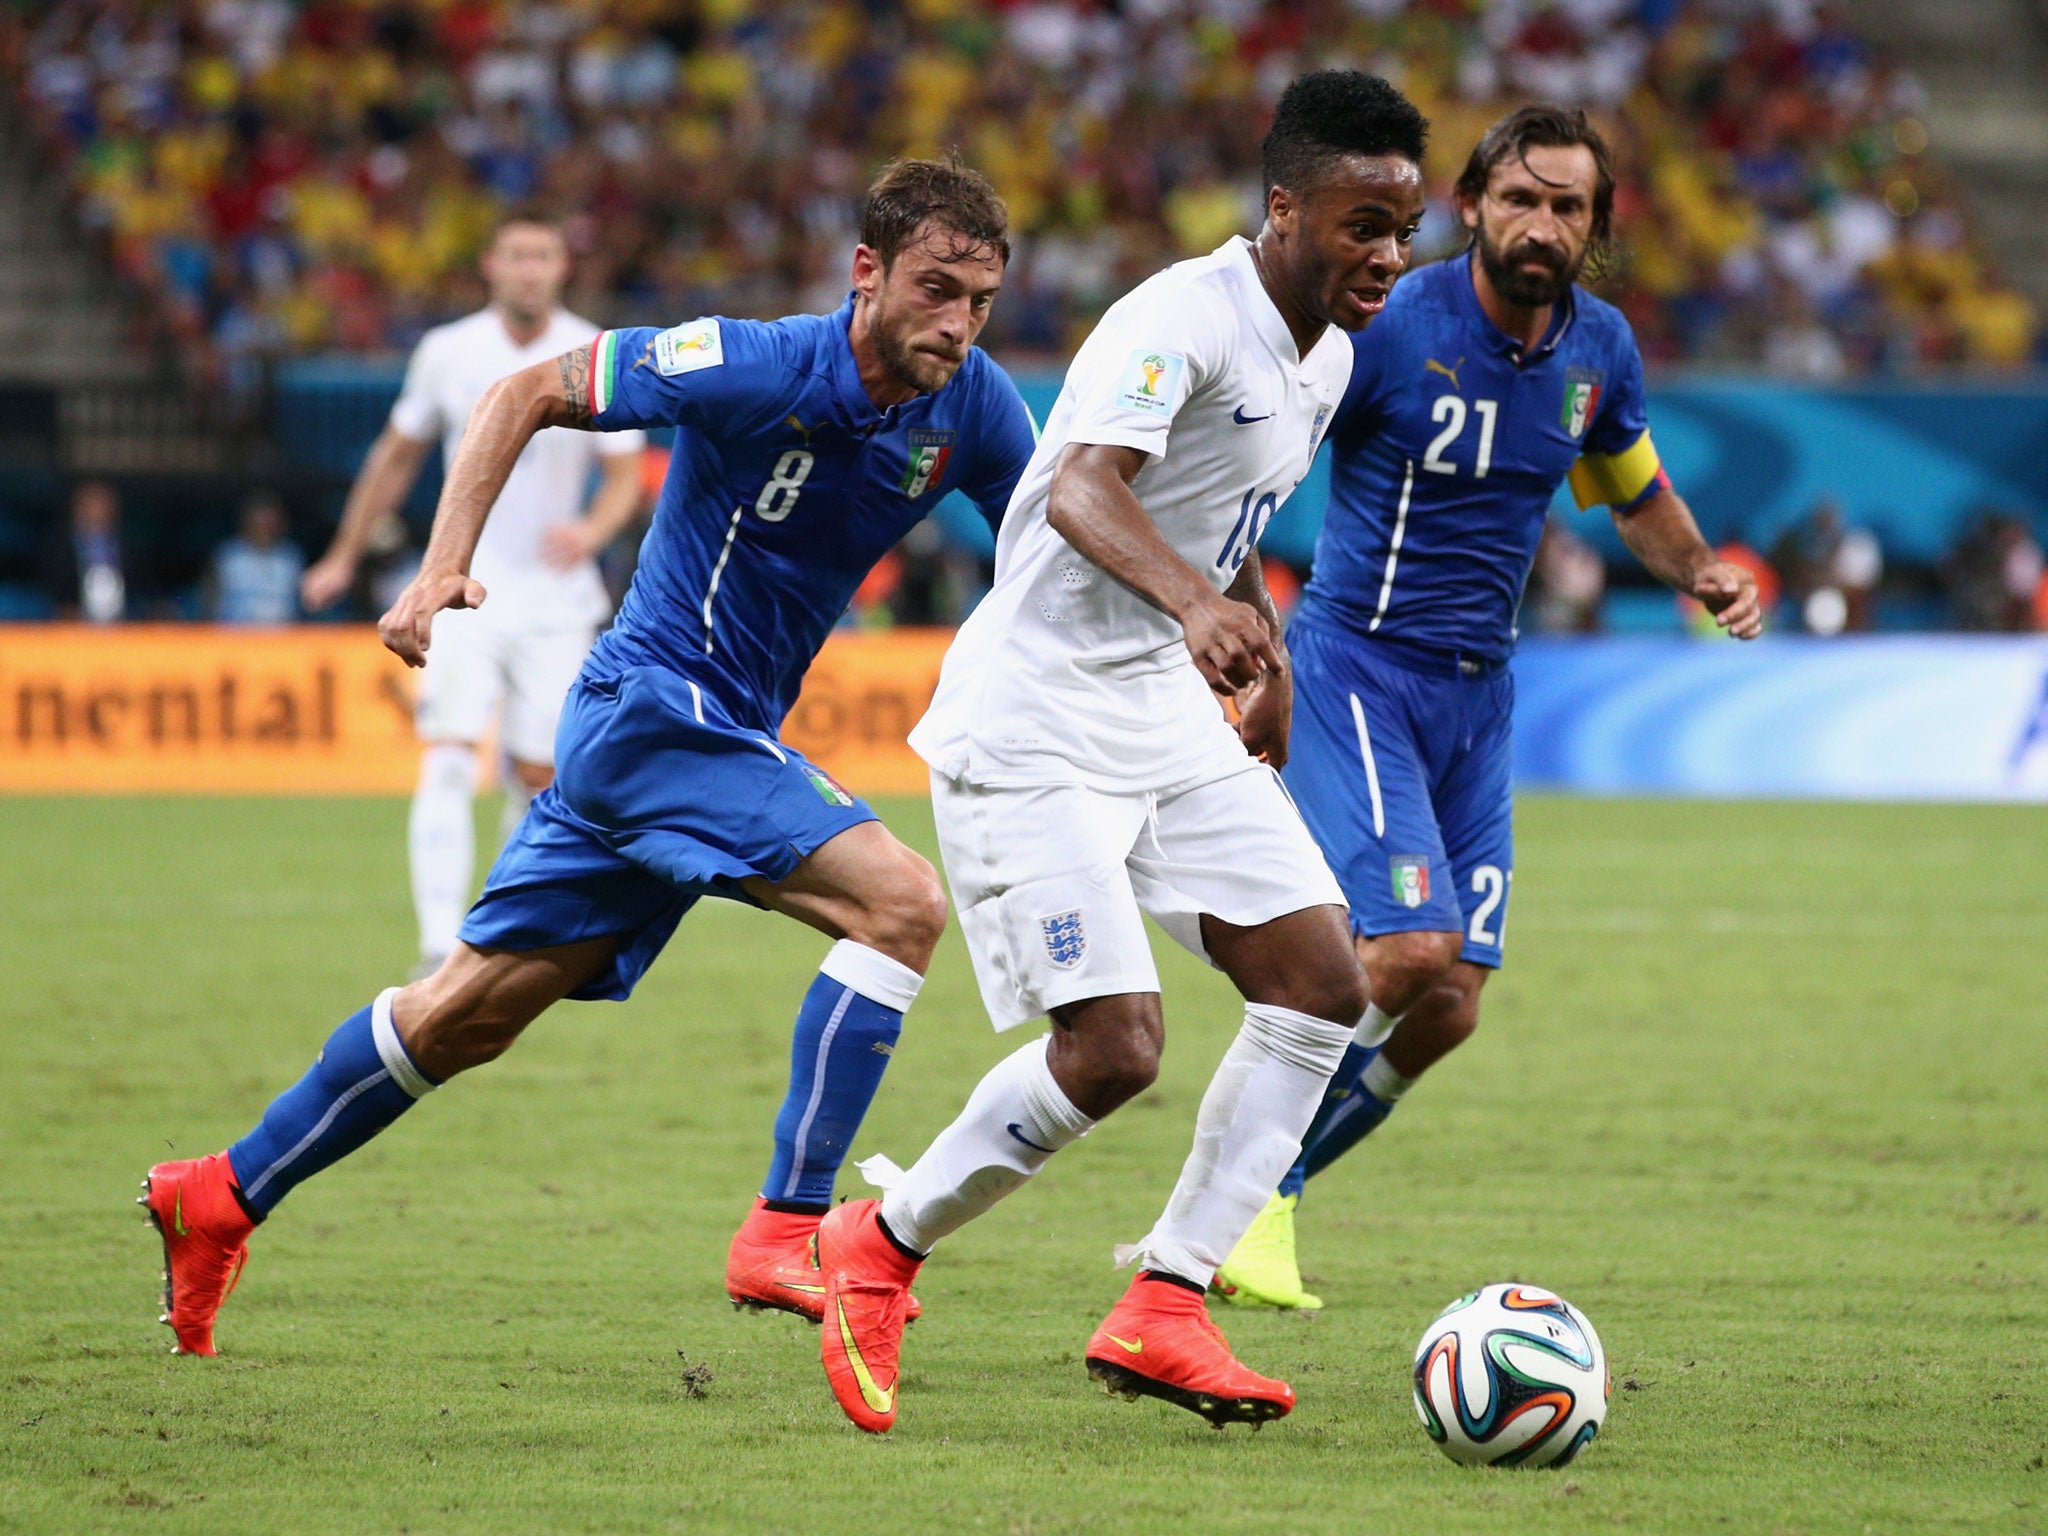 Raheem Sterling was fantastic against a strong Italy team